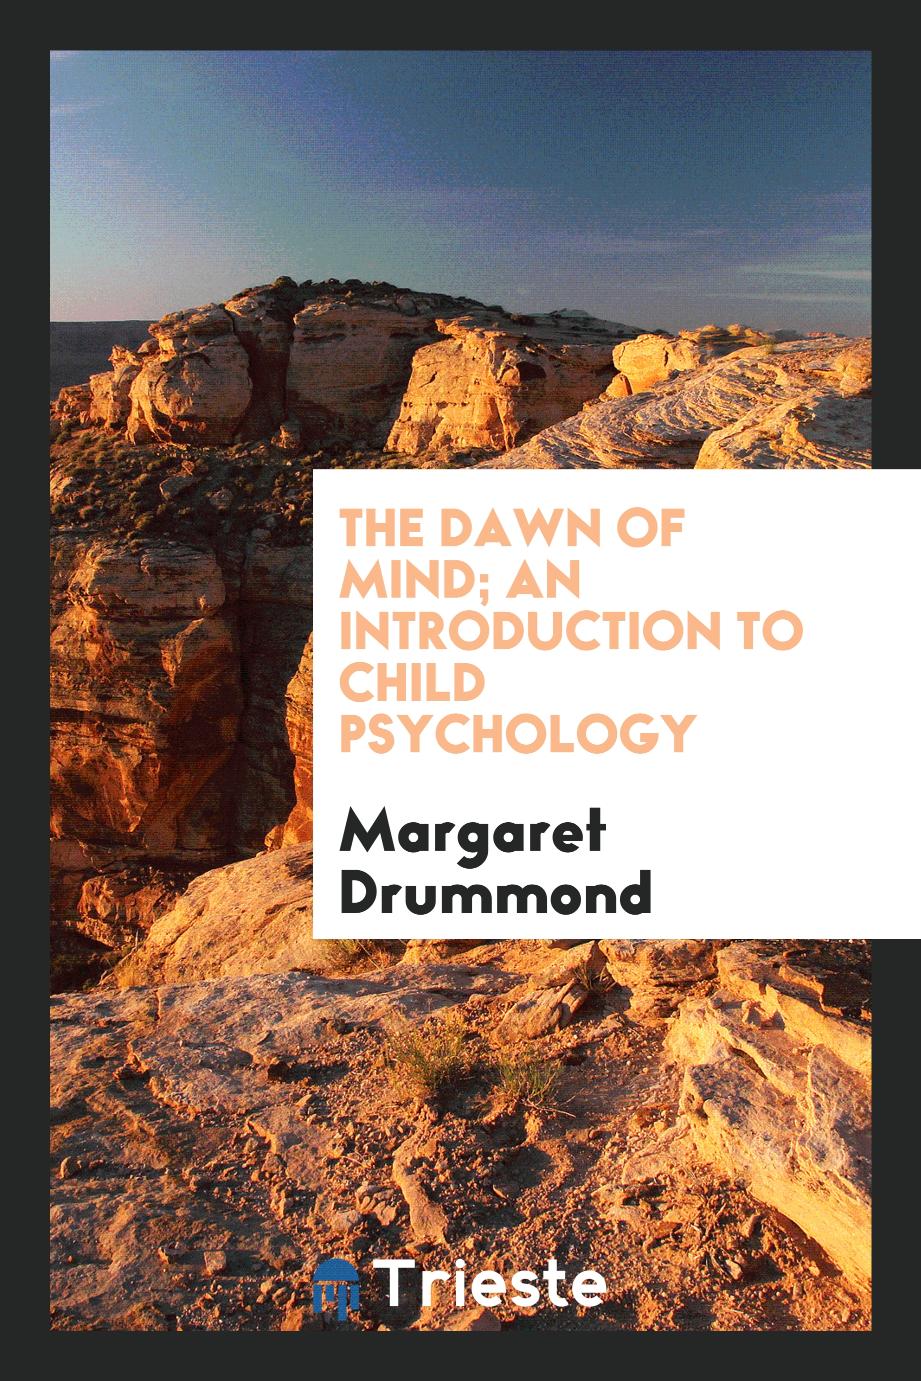 The dawn of mind; an introduction to child psychology